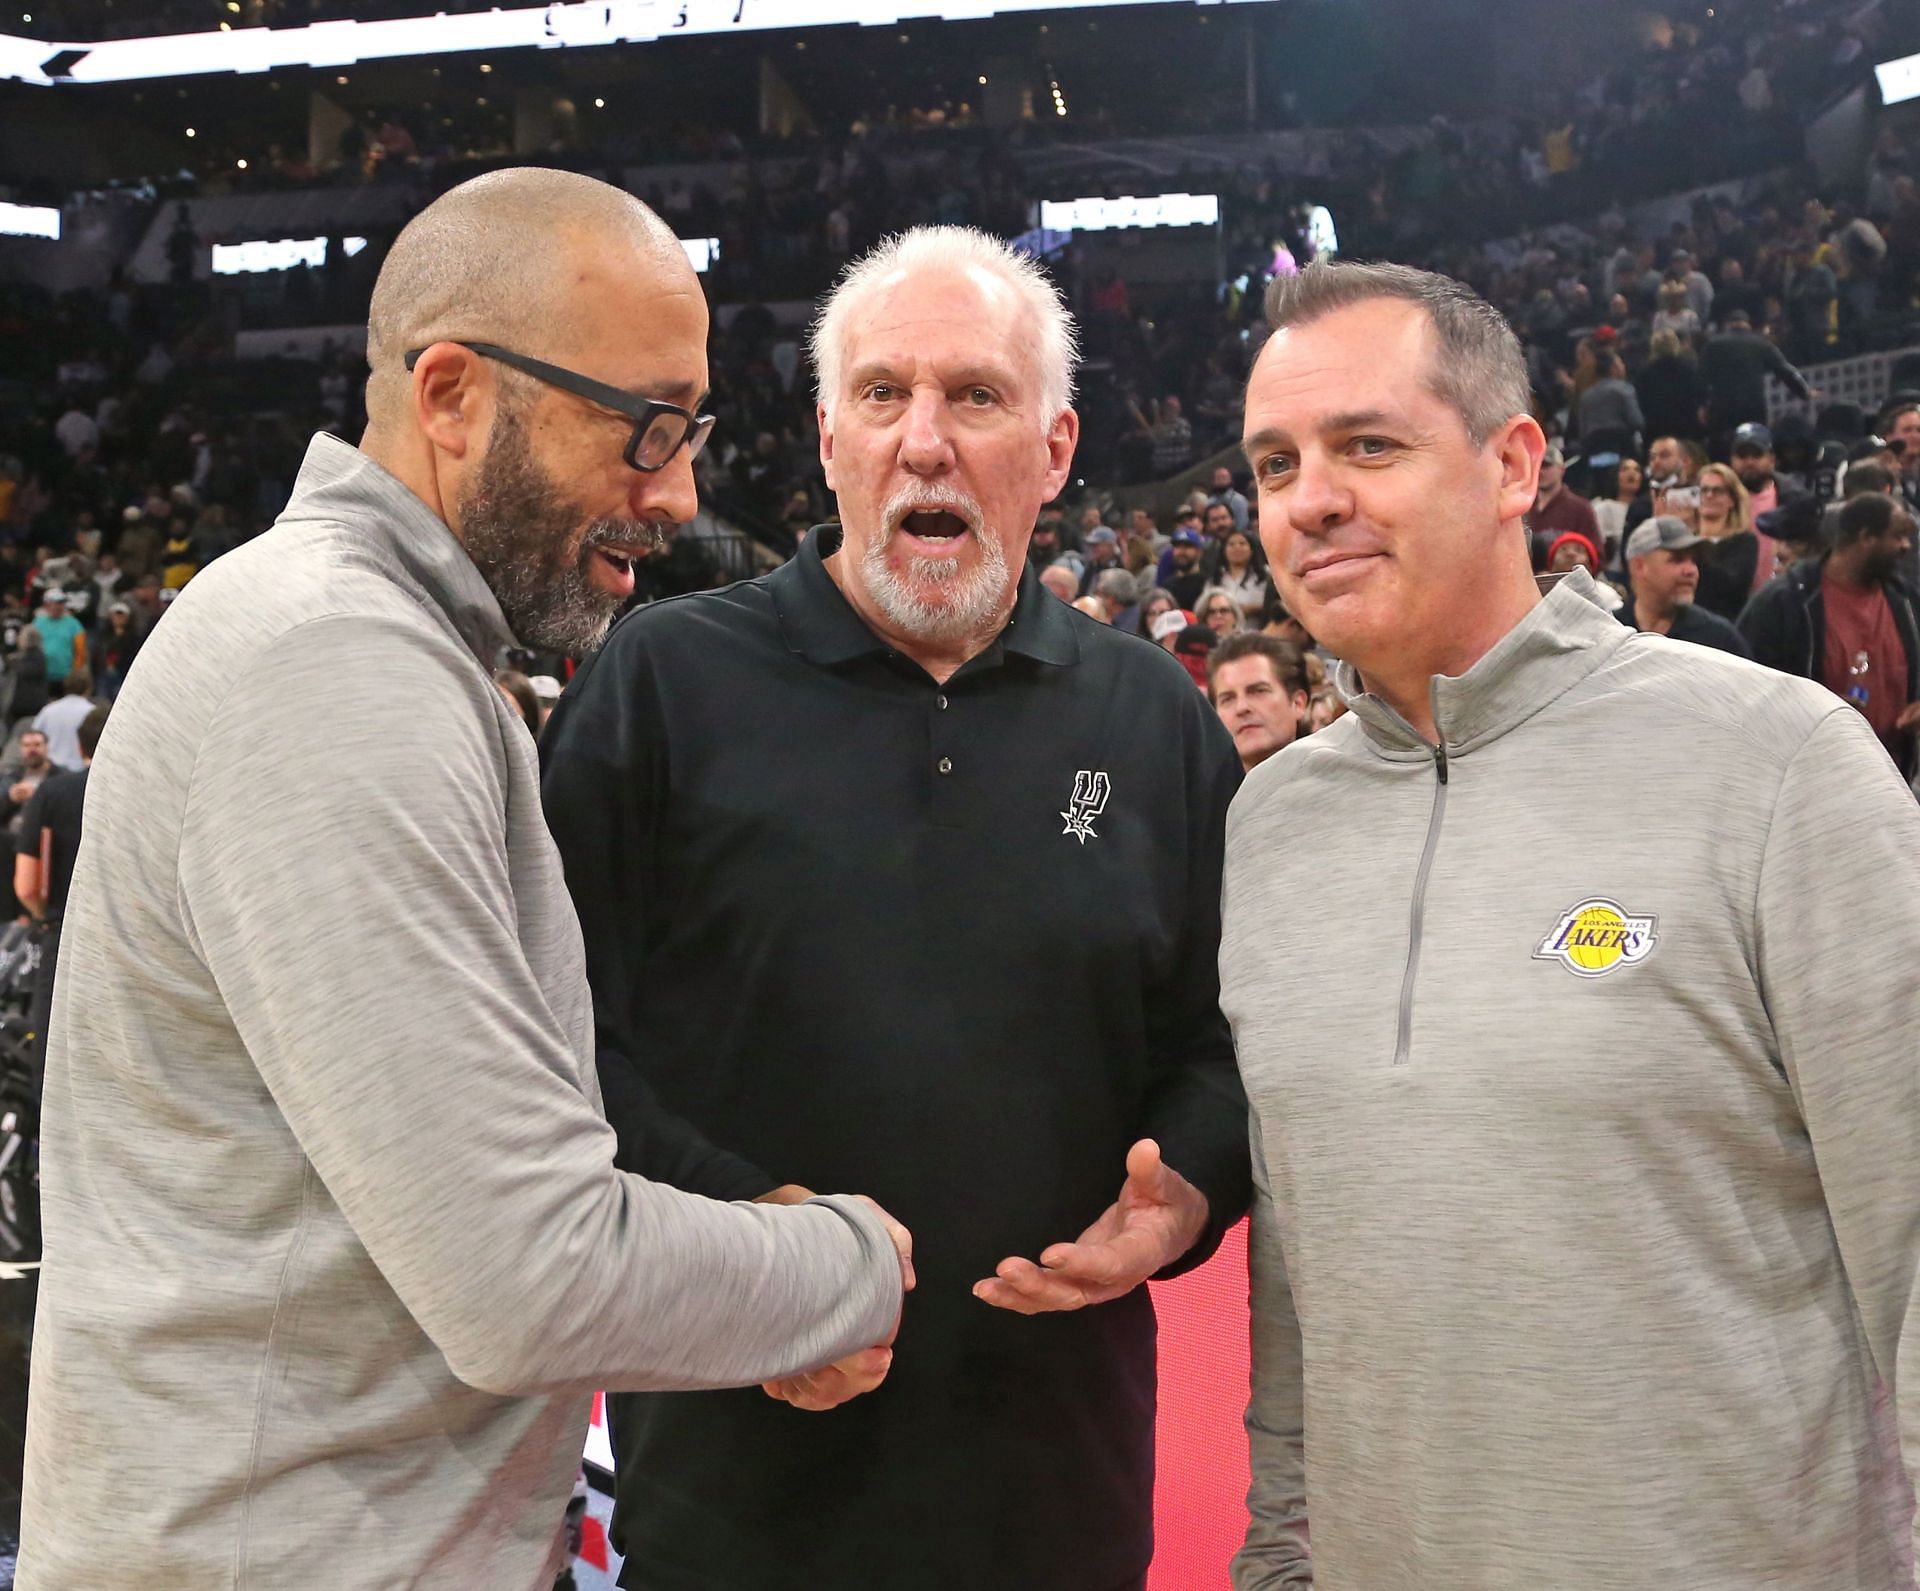 Head coach Gregg Popovich of the San Antonio Spurs is congratulated by head coach Frank Vogel (R) and assistant coach David Fizdale (L) of the LA Lakers after Popovich tied the NBA record for all-time wins of 1,335 by an NBA head coach after the San Antonio Spurs defeated the Los Angeles Lakers 117-110 at AT&amp;T Center on March 7, 2022 in San Antonio, Texas.